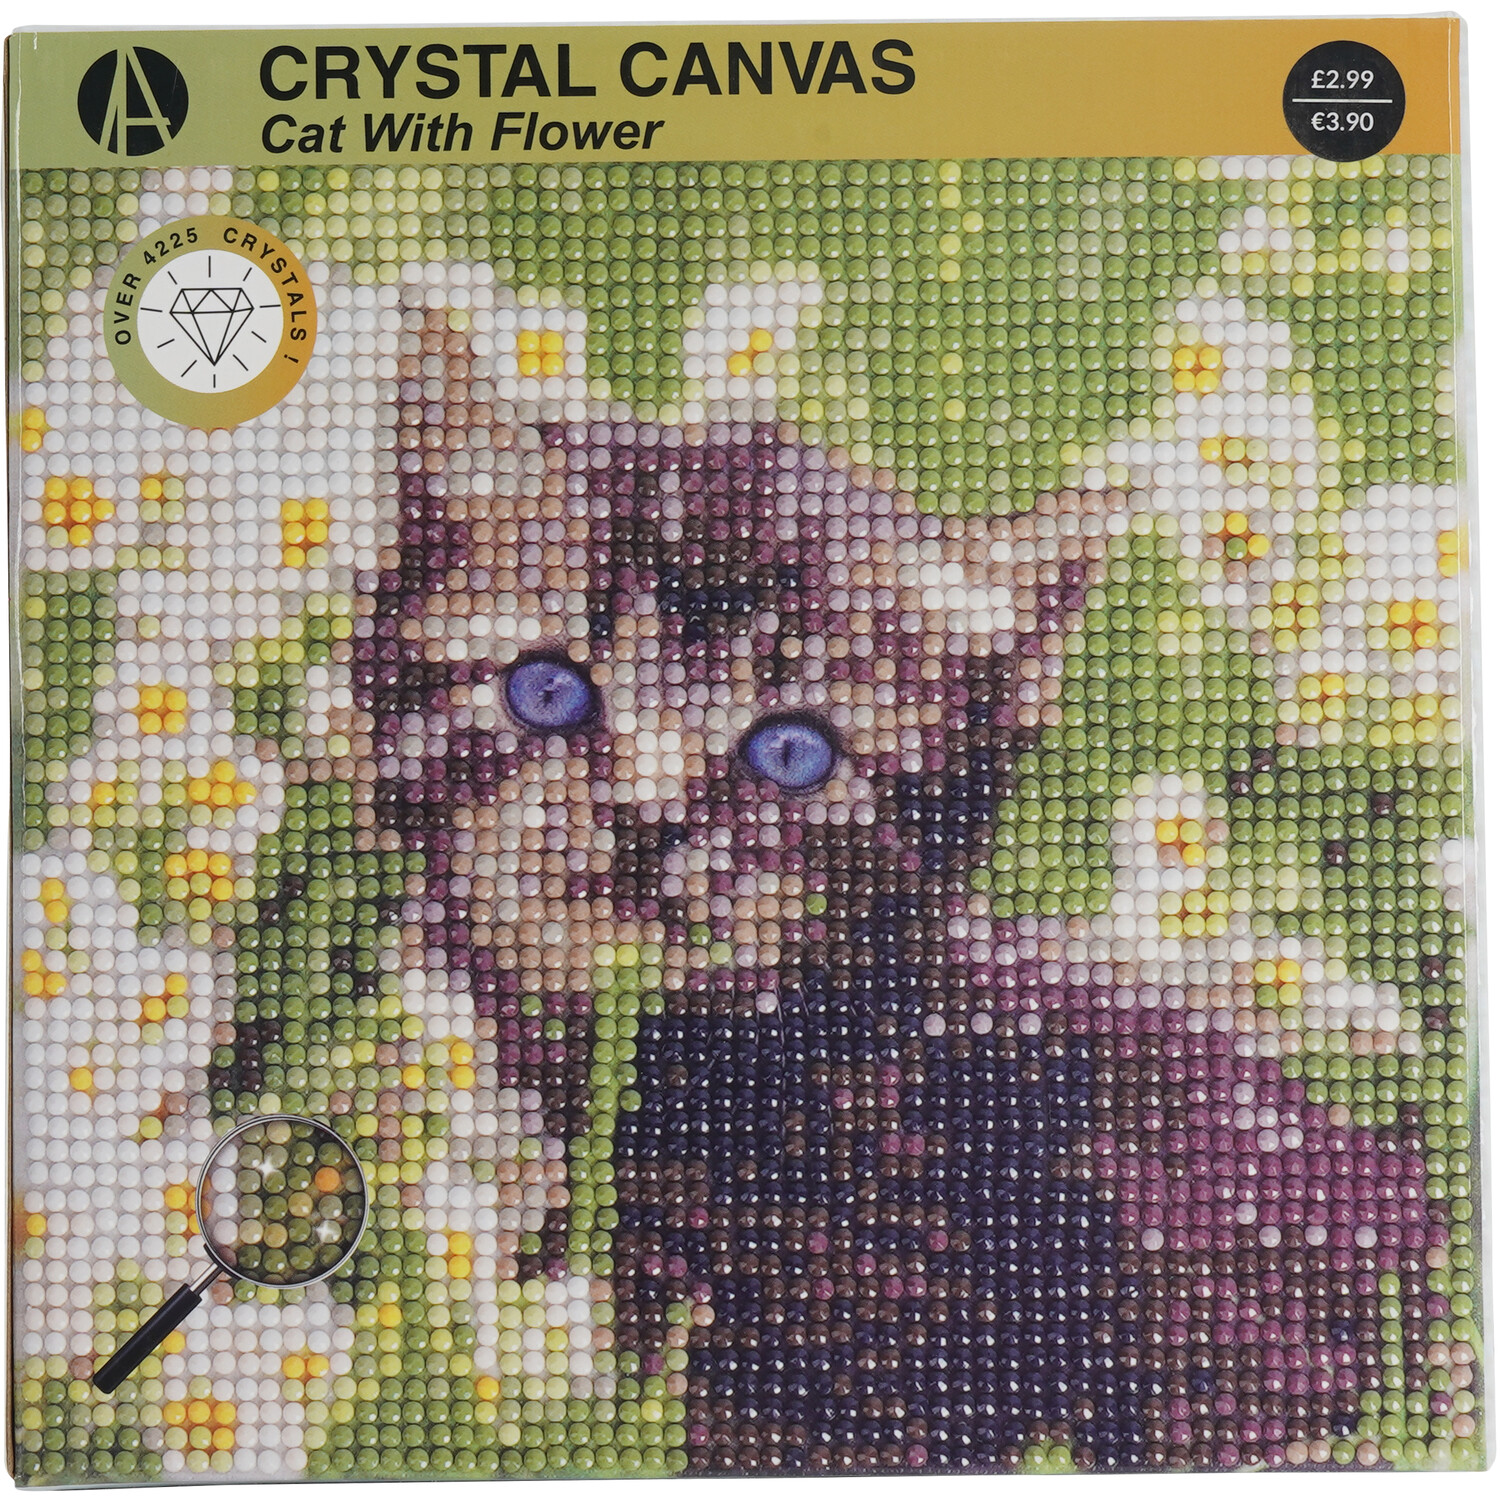 Crystal Canvas Cat or Puppy with Flower Image 4